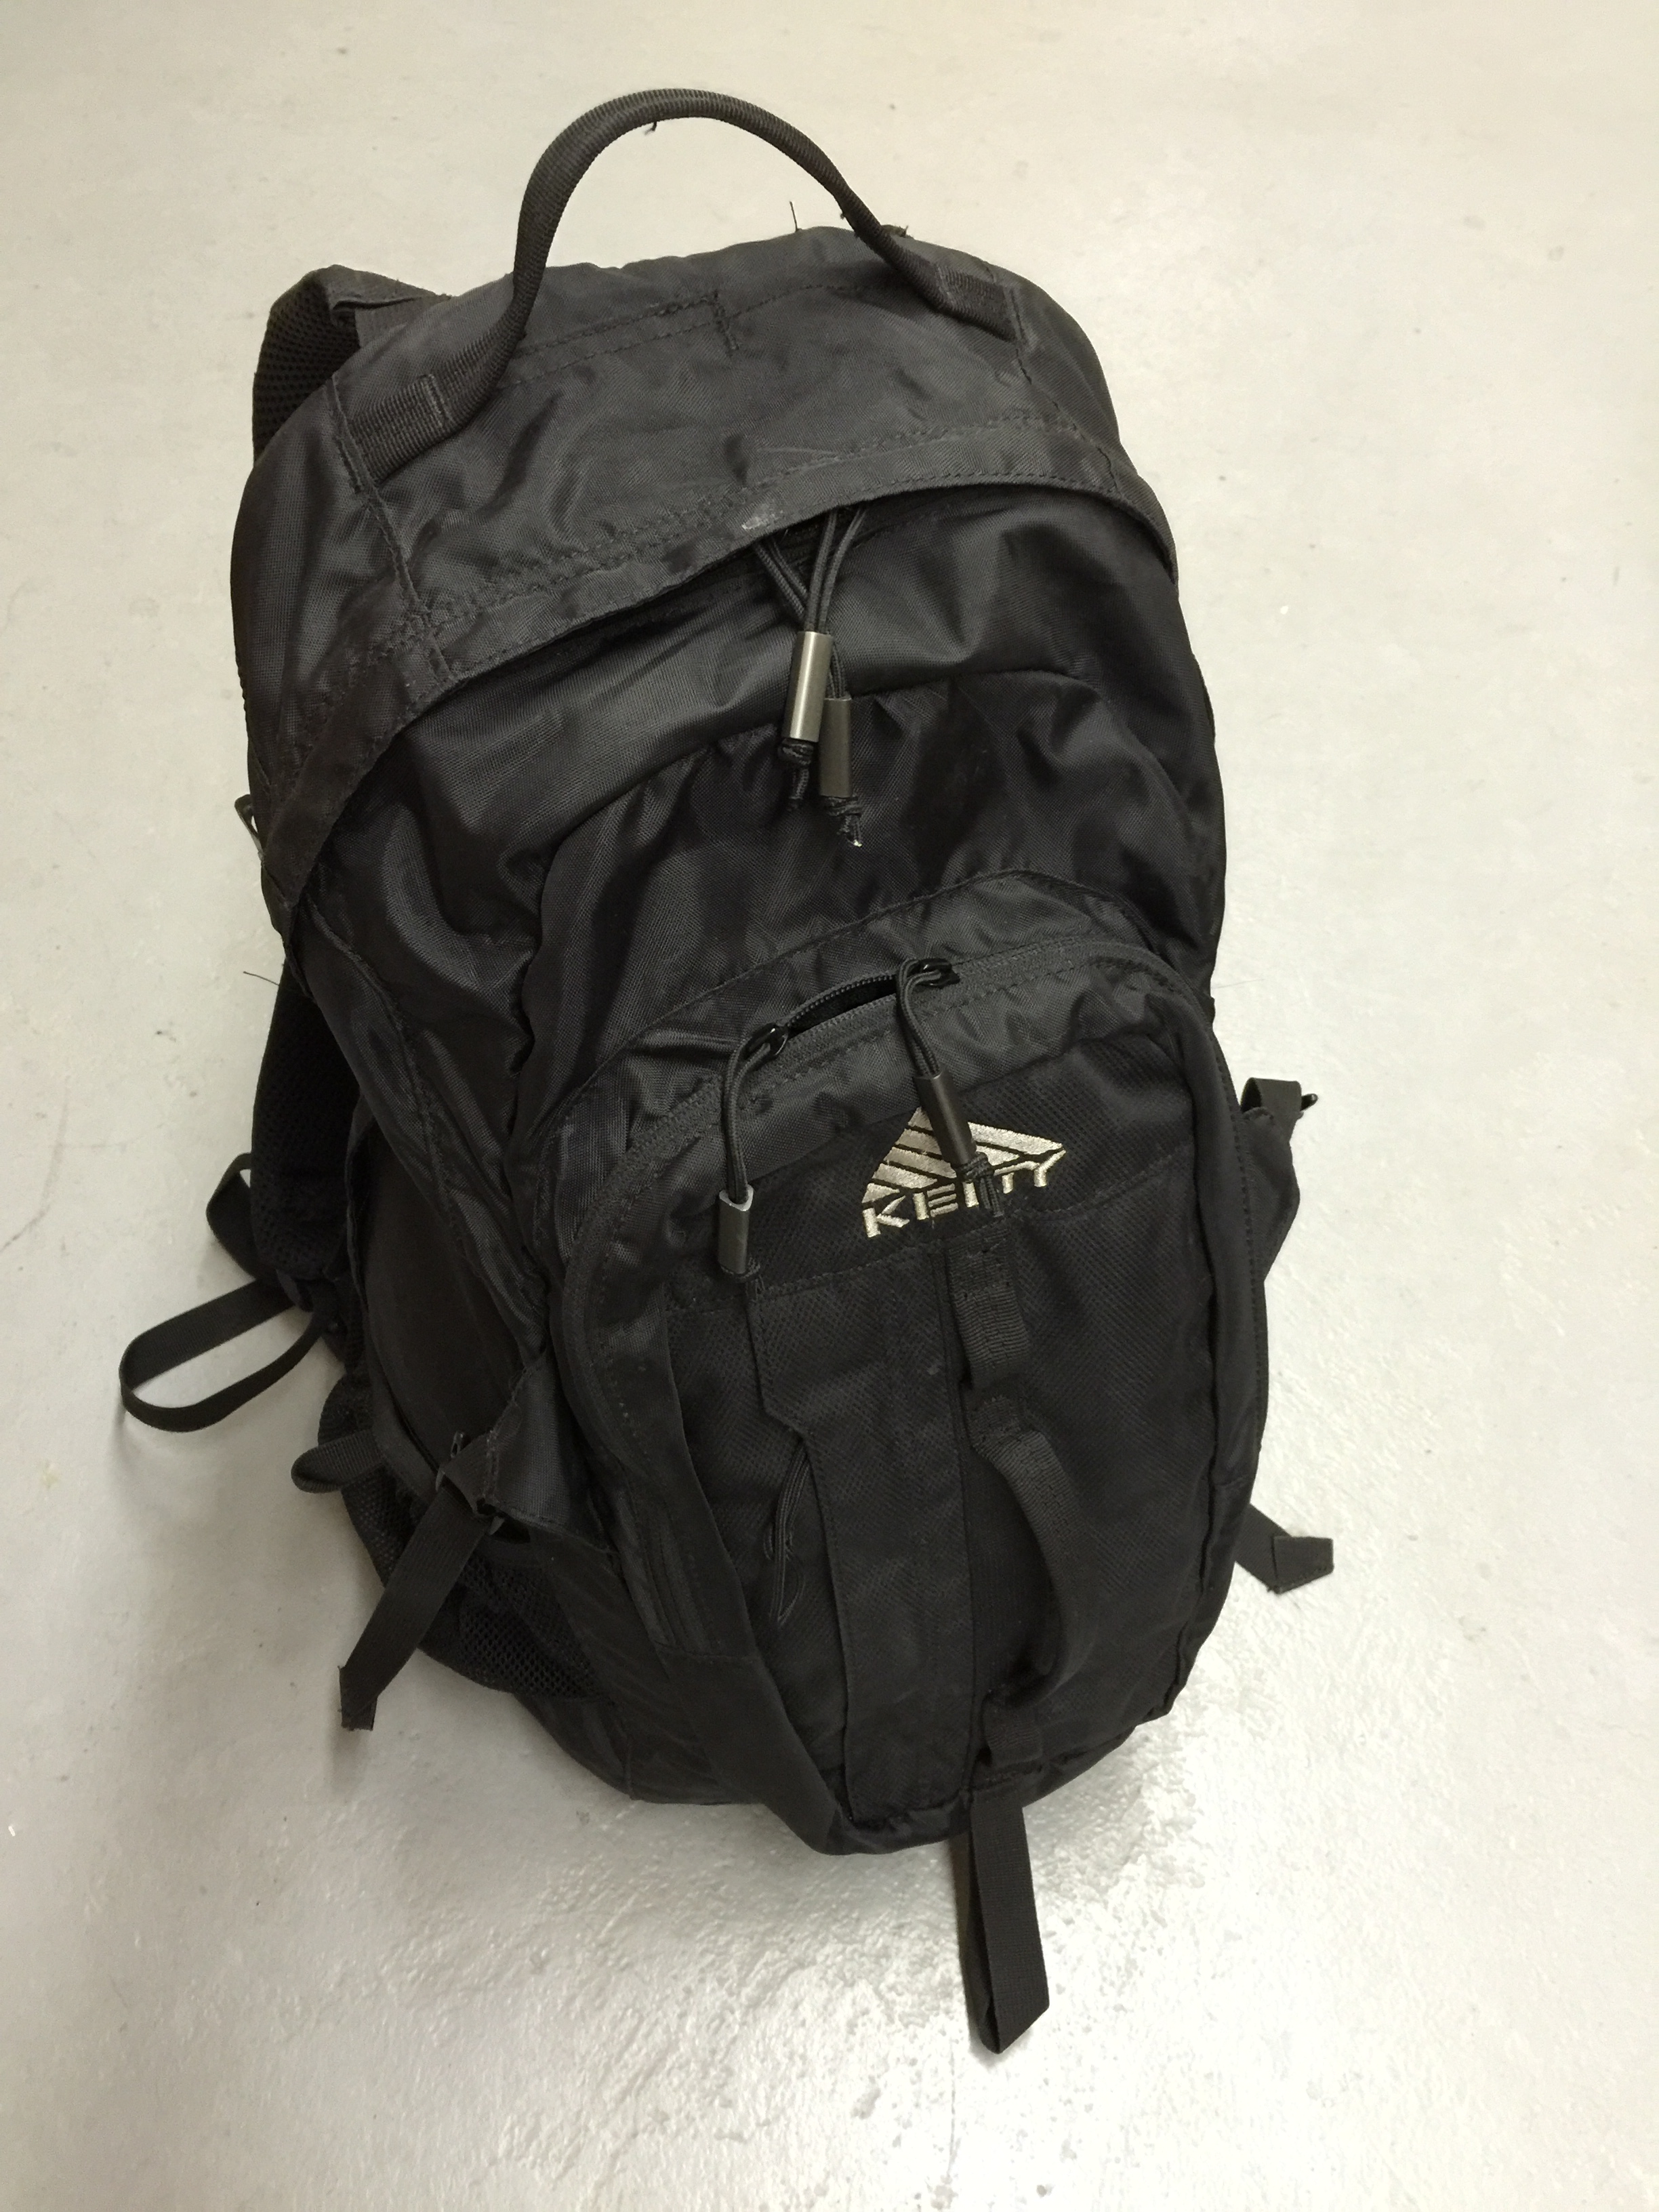 We filled this backpack with rocks, it weighed about 50 lbs. The soldiers kits came in to about 60lbs